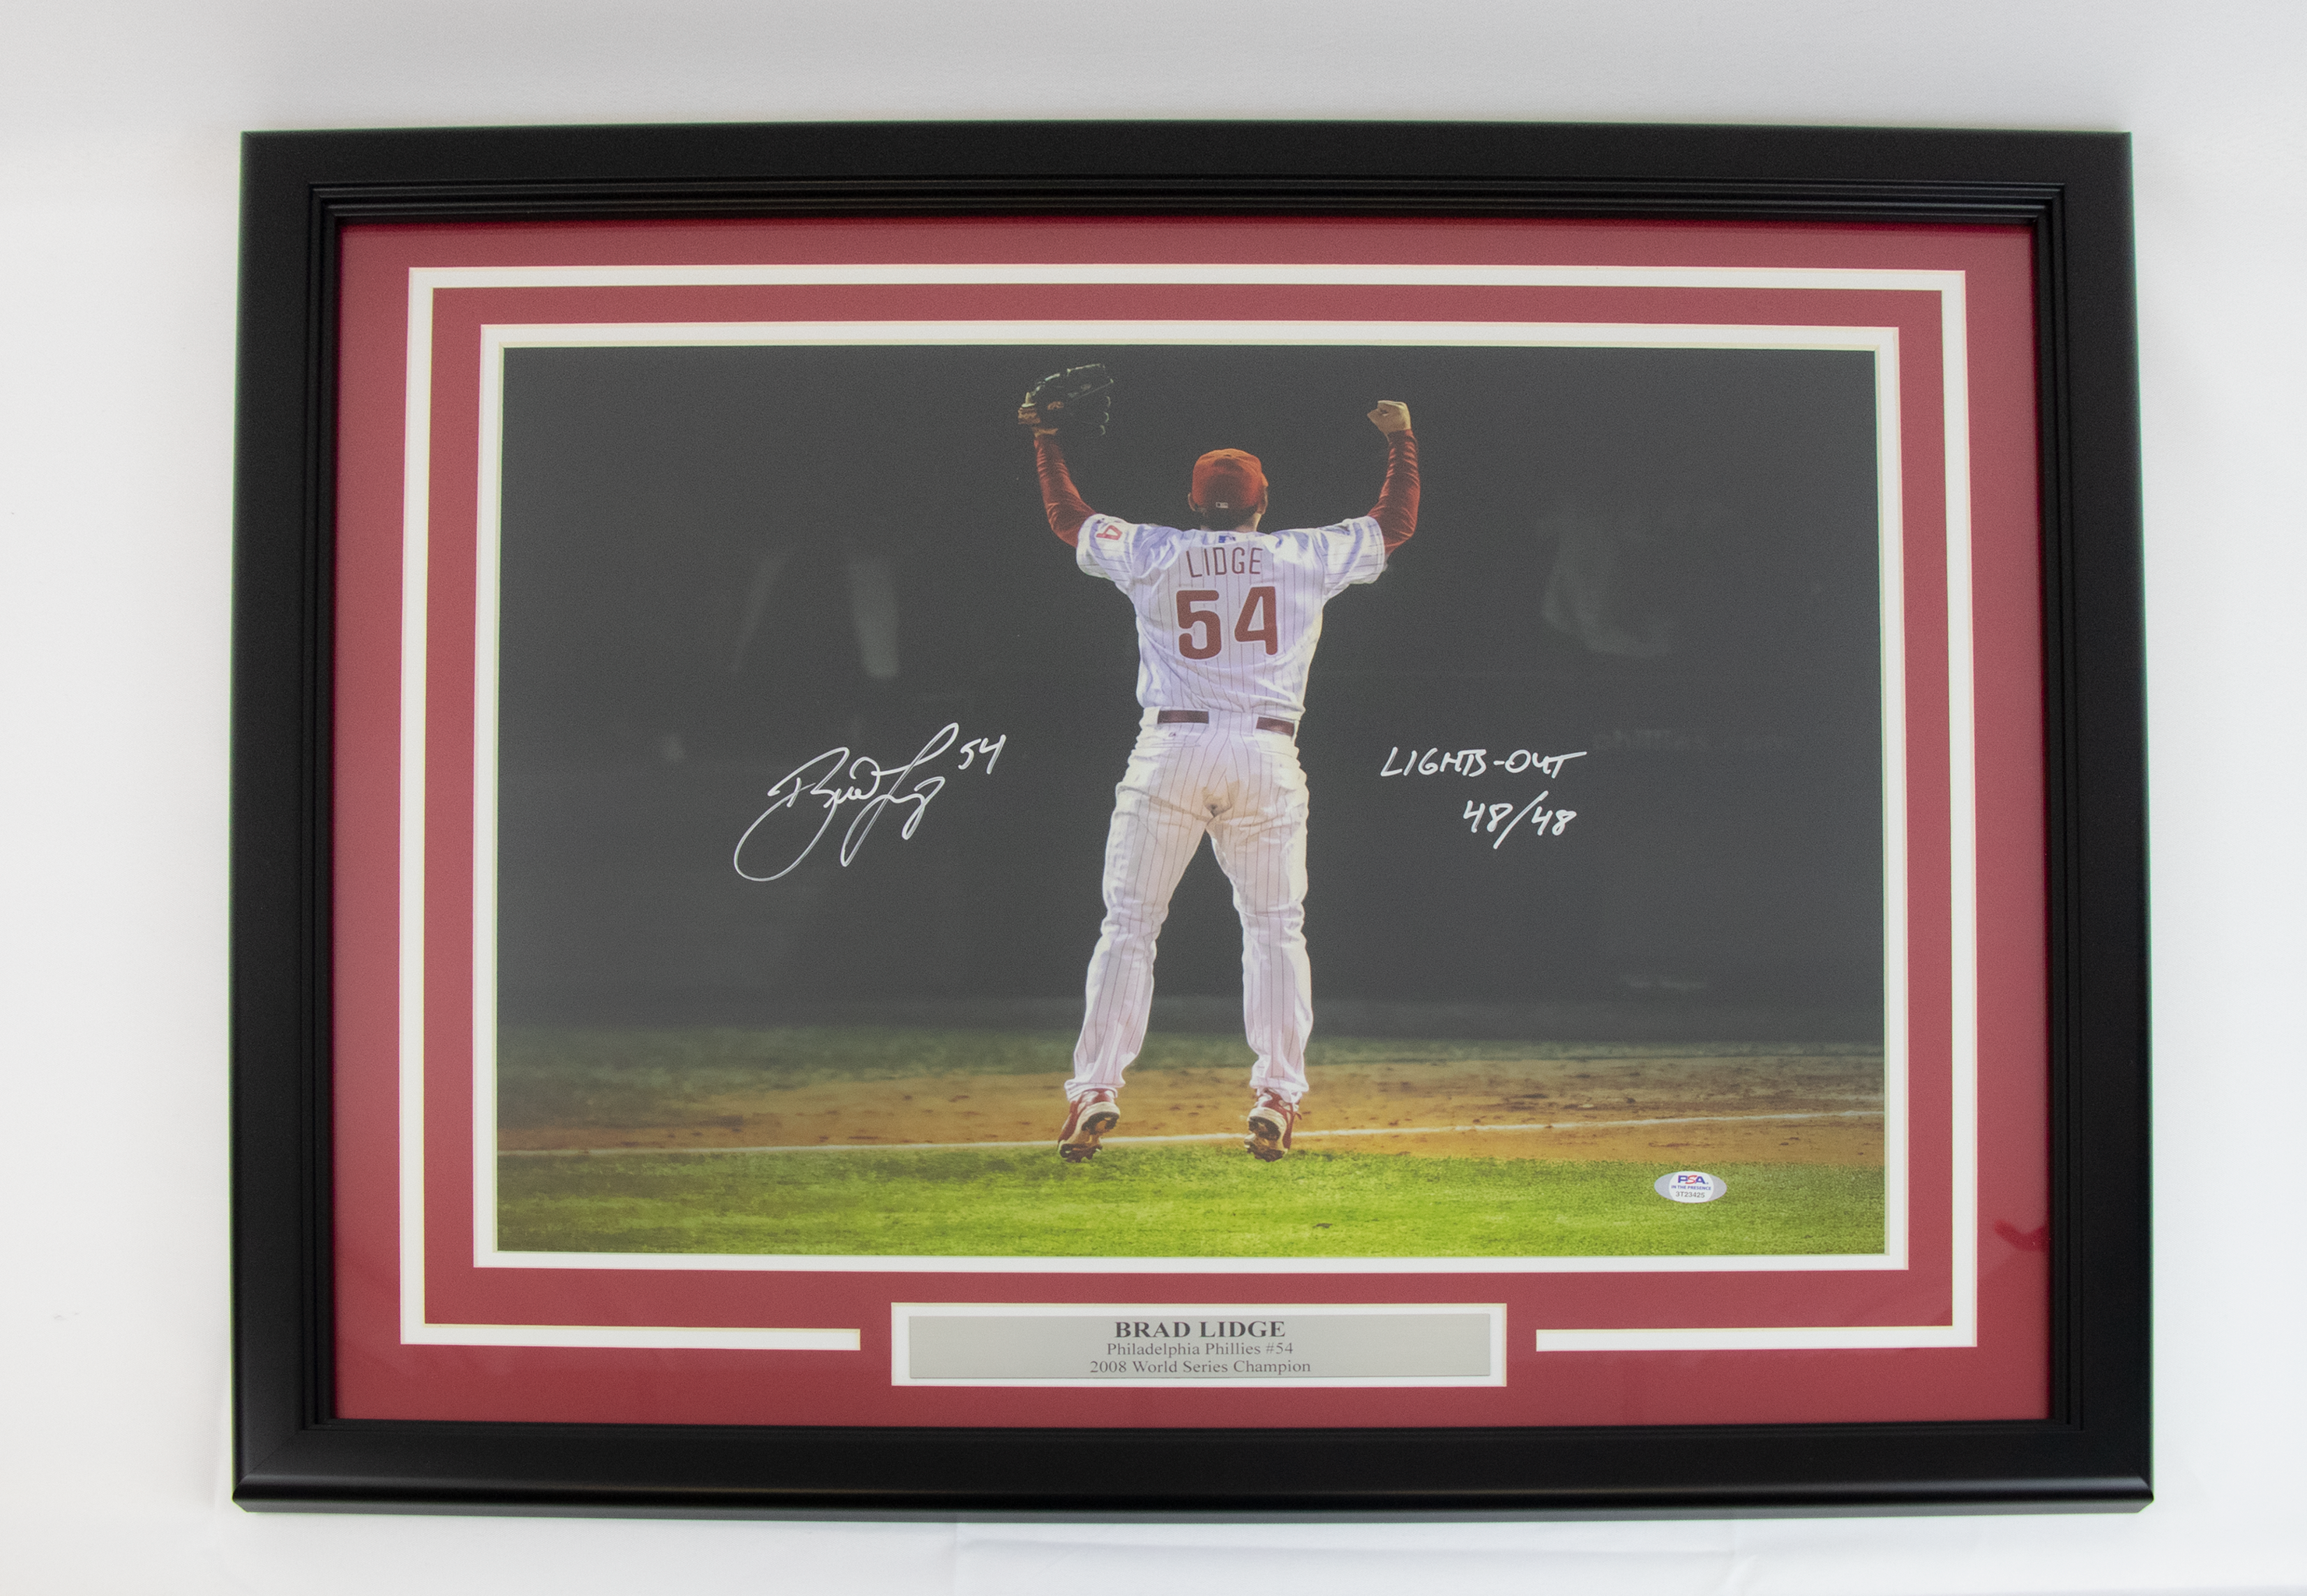 Brad Lidge Autographed 16x20 World Series Last Out Photo Framed